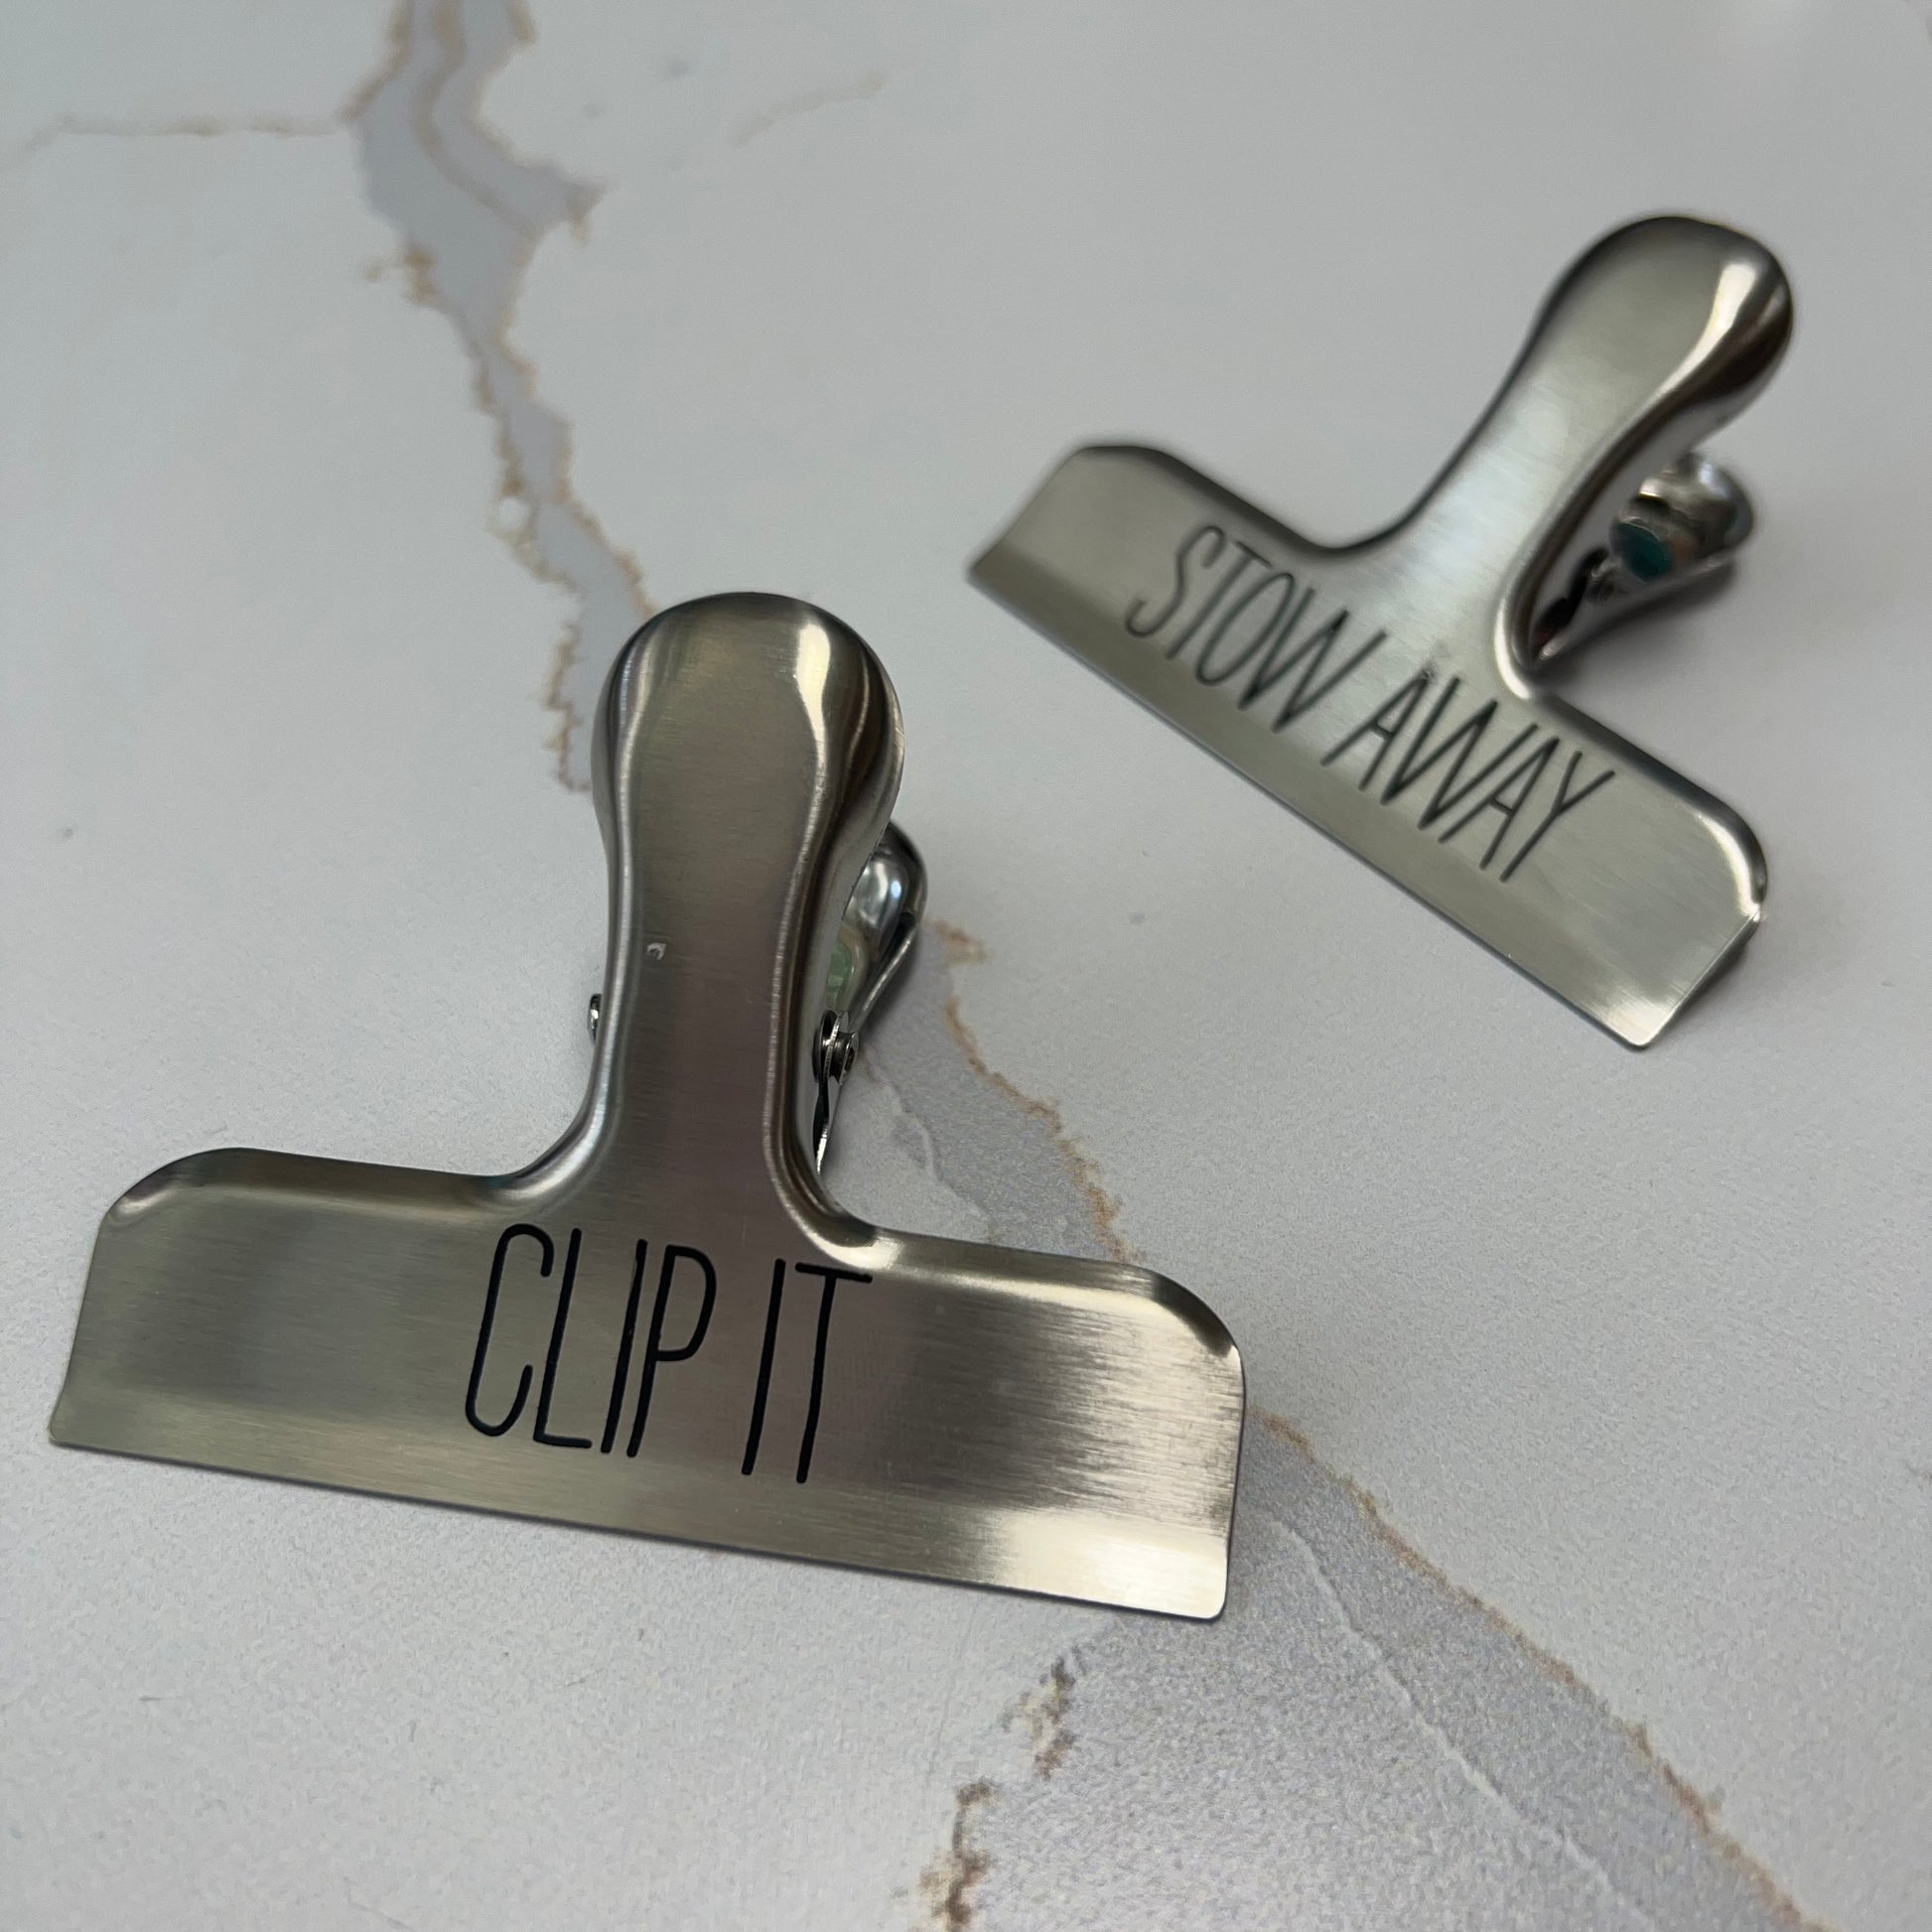 "clip it" and "stow away" bag clips on a white marble counter.